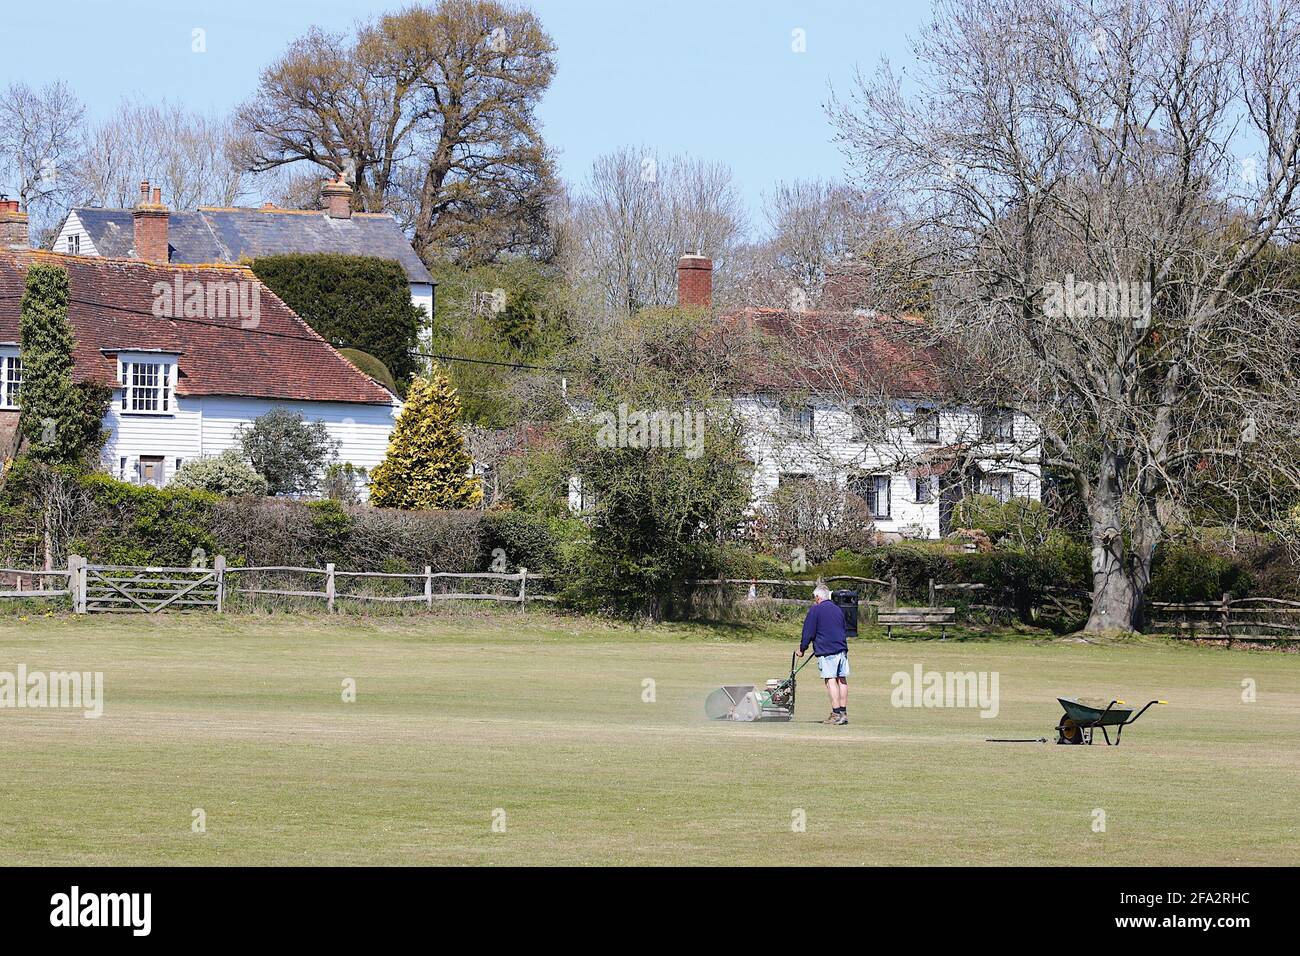 Newenden, Kent, UK. 22 Apr, 2021. UK Weather: Sunny in the small village of Newenden in the district of Ashford, Kent. A groundsman mows the village grounds cricket playing field on a warm and sunny spring day. Photo Credit: Paul Lawrenson /Alamy Live News Stock Photo